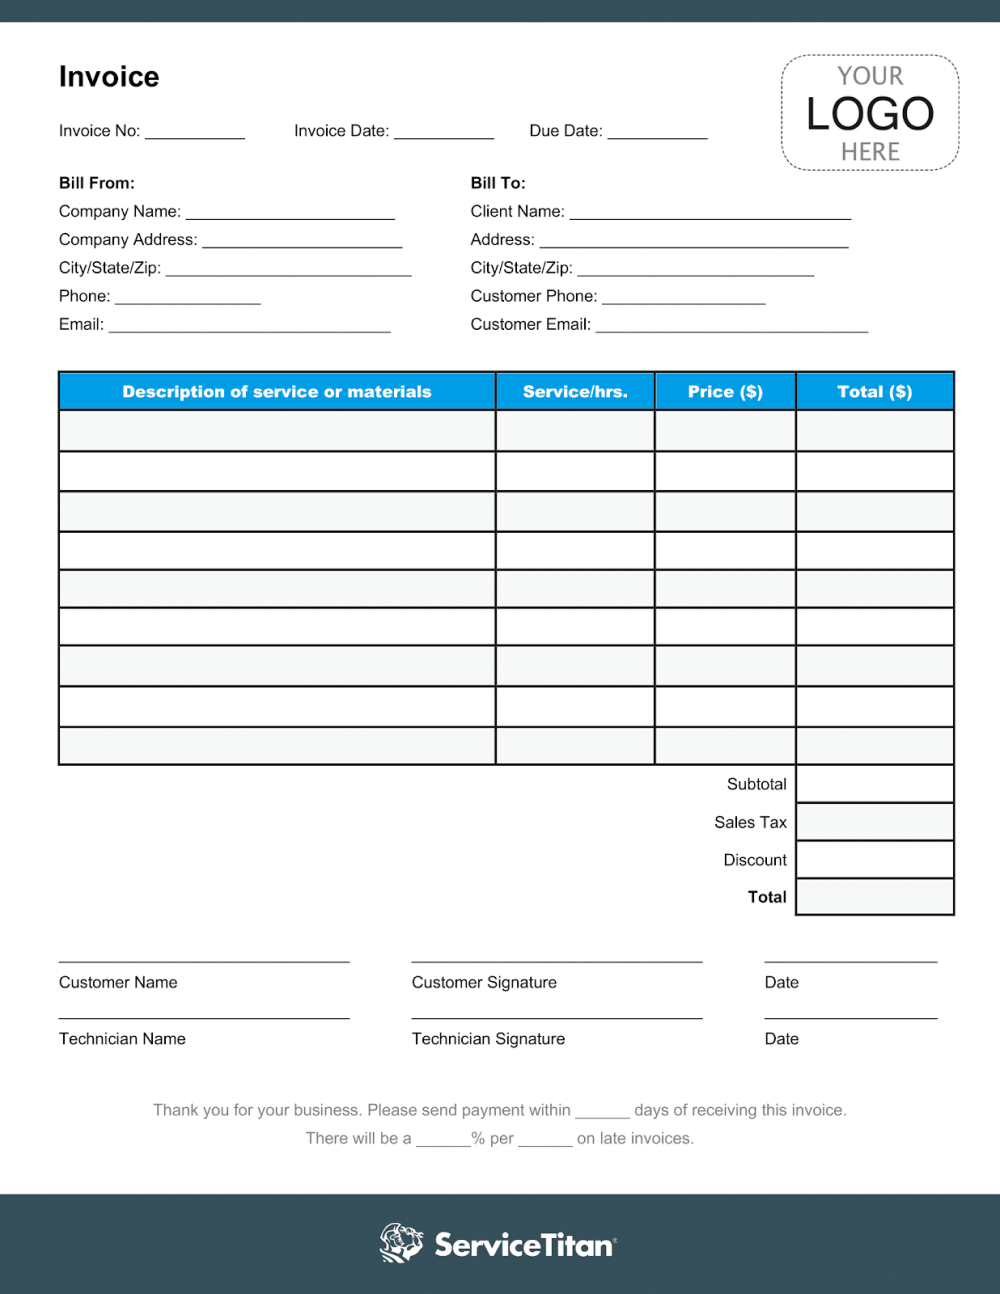 electrician-invoice-template-free-pdf-download-interactive-tool